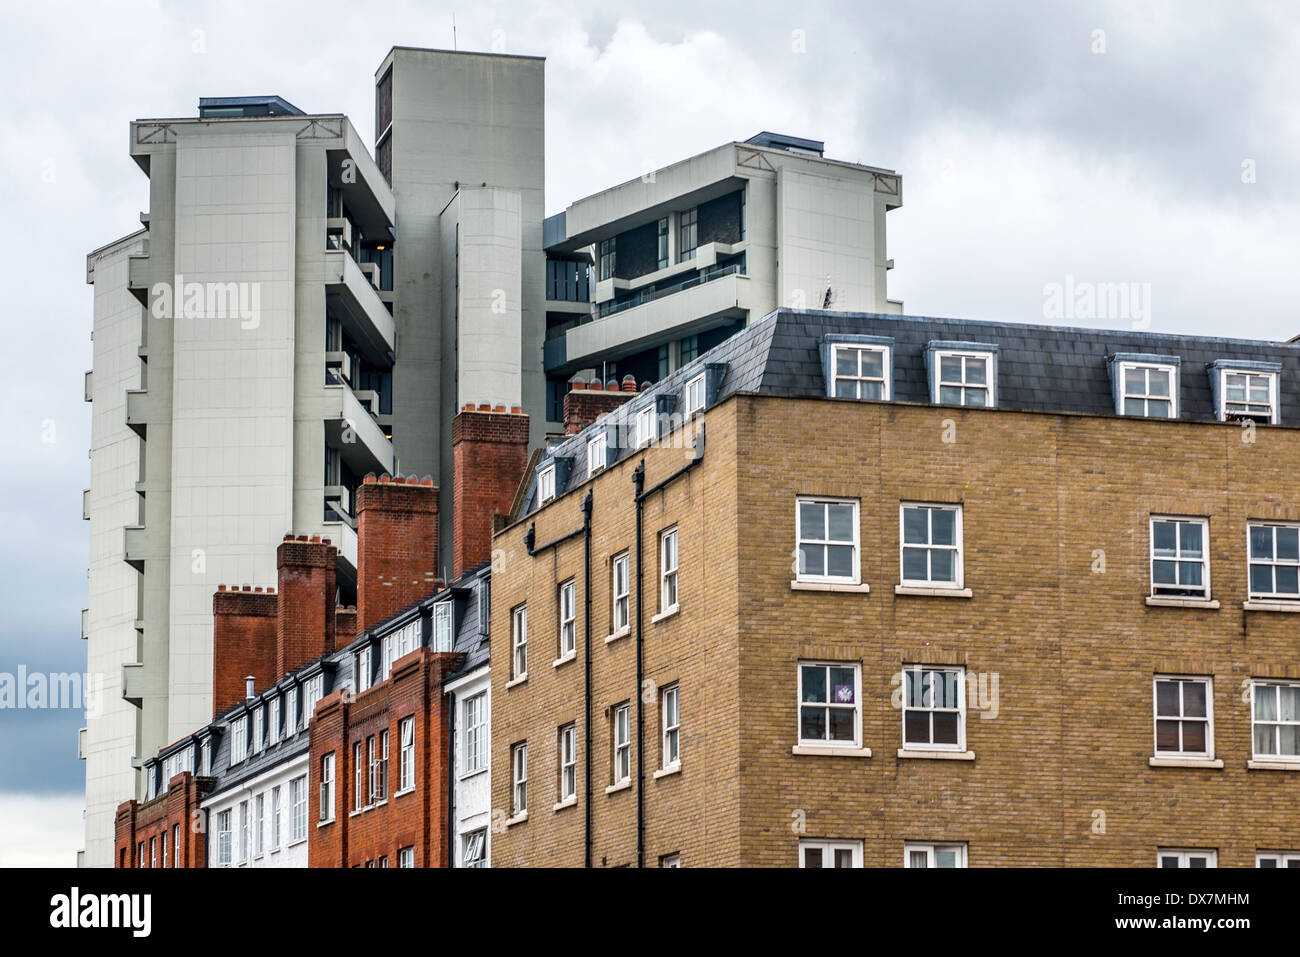 High rise social housing in the Borough of Hackney, East london Stock Photo